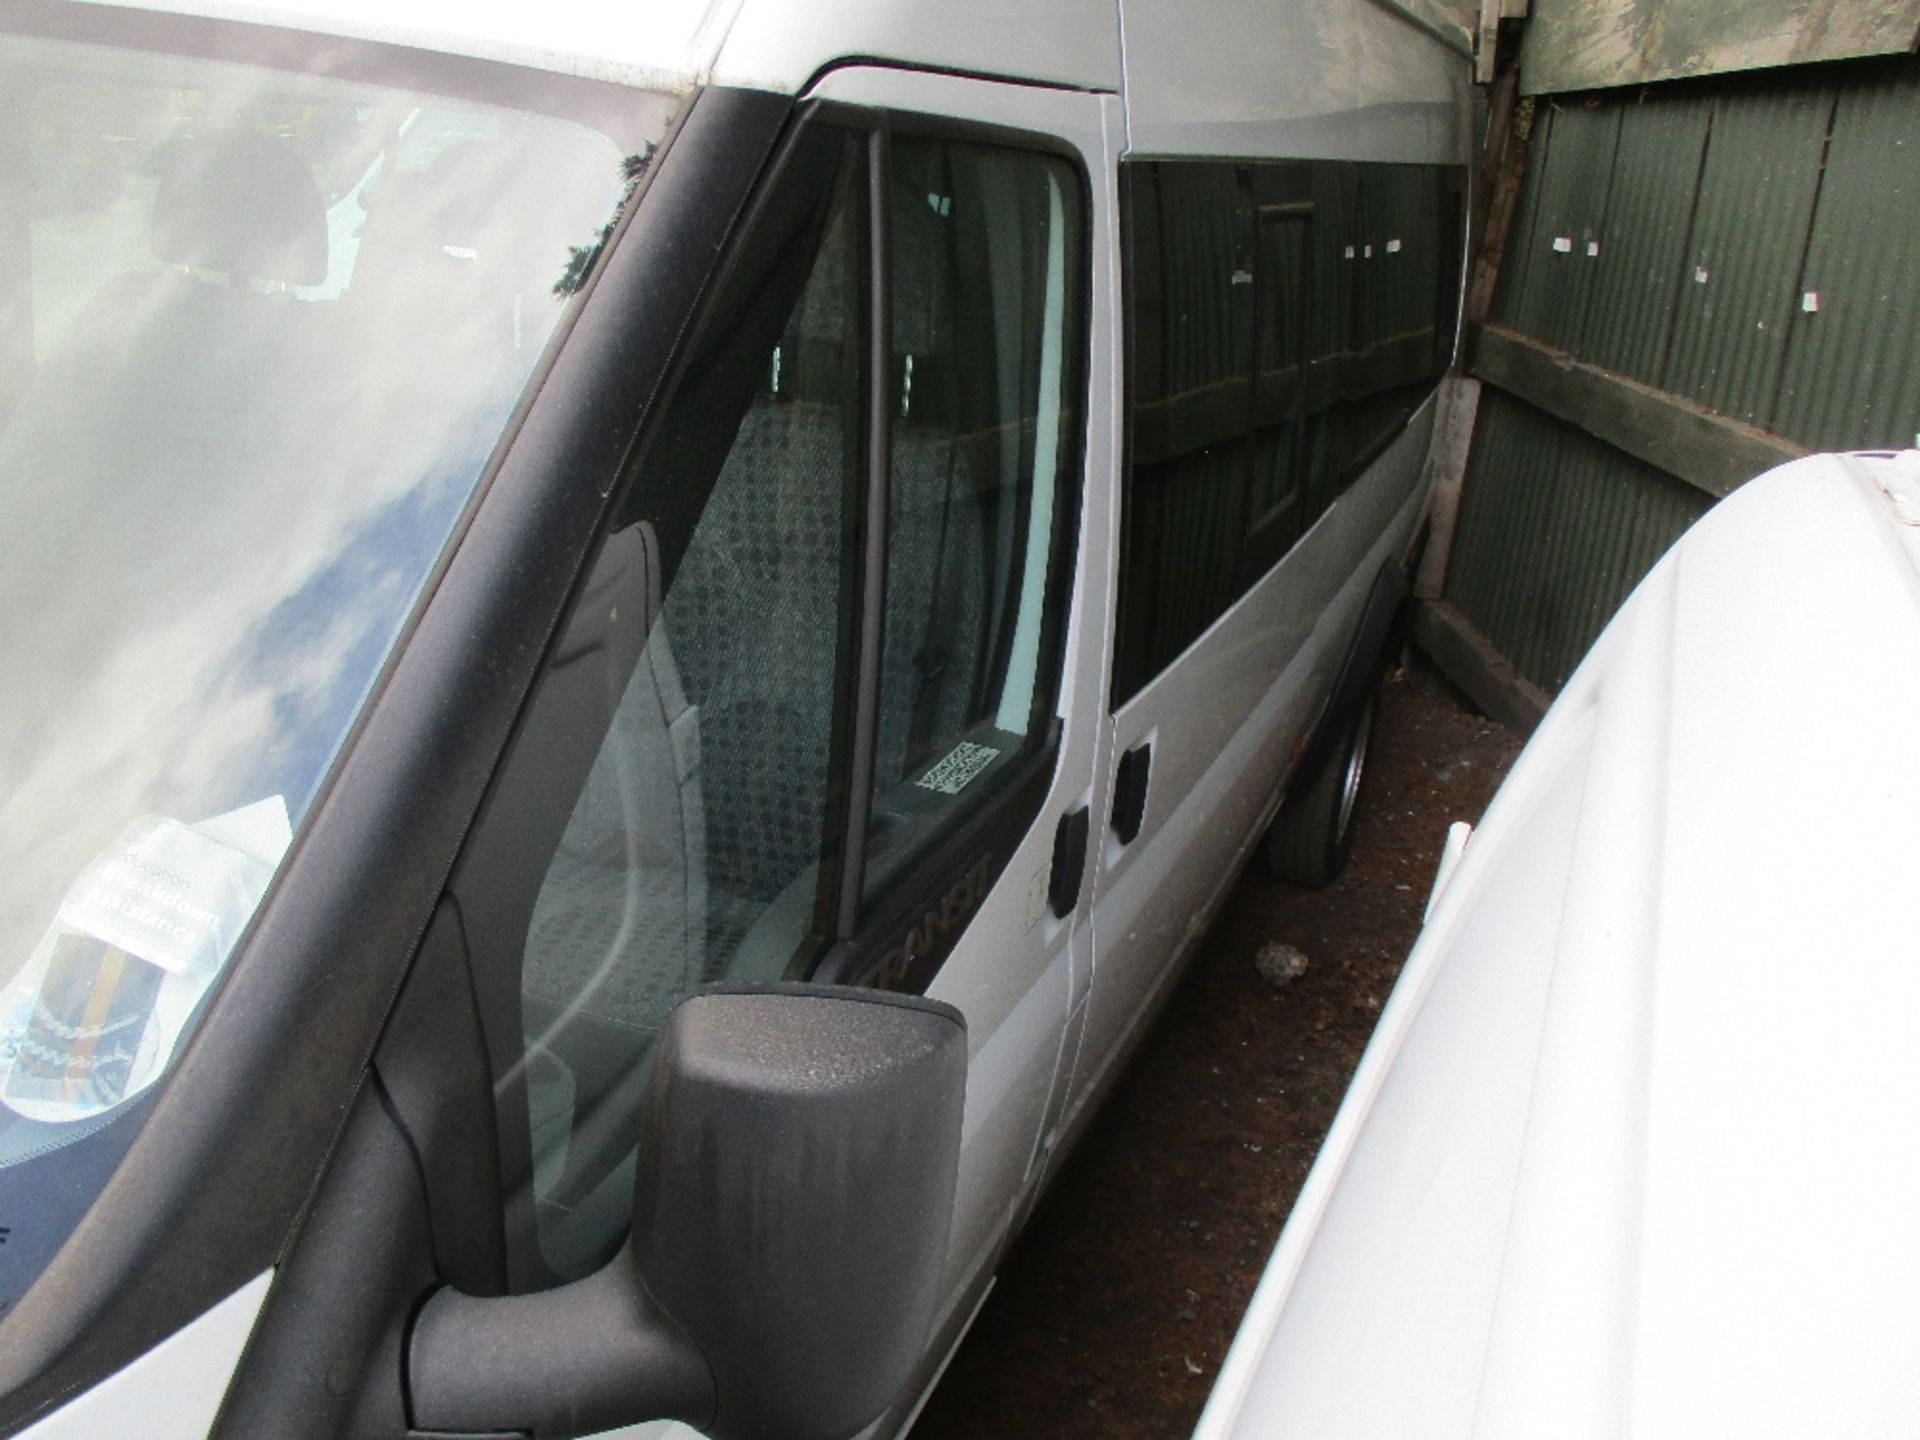 Ford Transit mini bus, 17 seats in total, REG:BD63 OEF previously damaged and repaired, 34,680rec. - Image 7 of 7